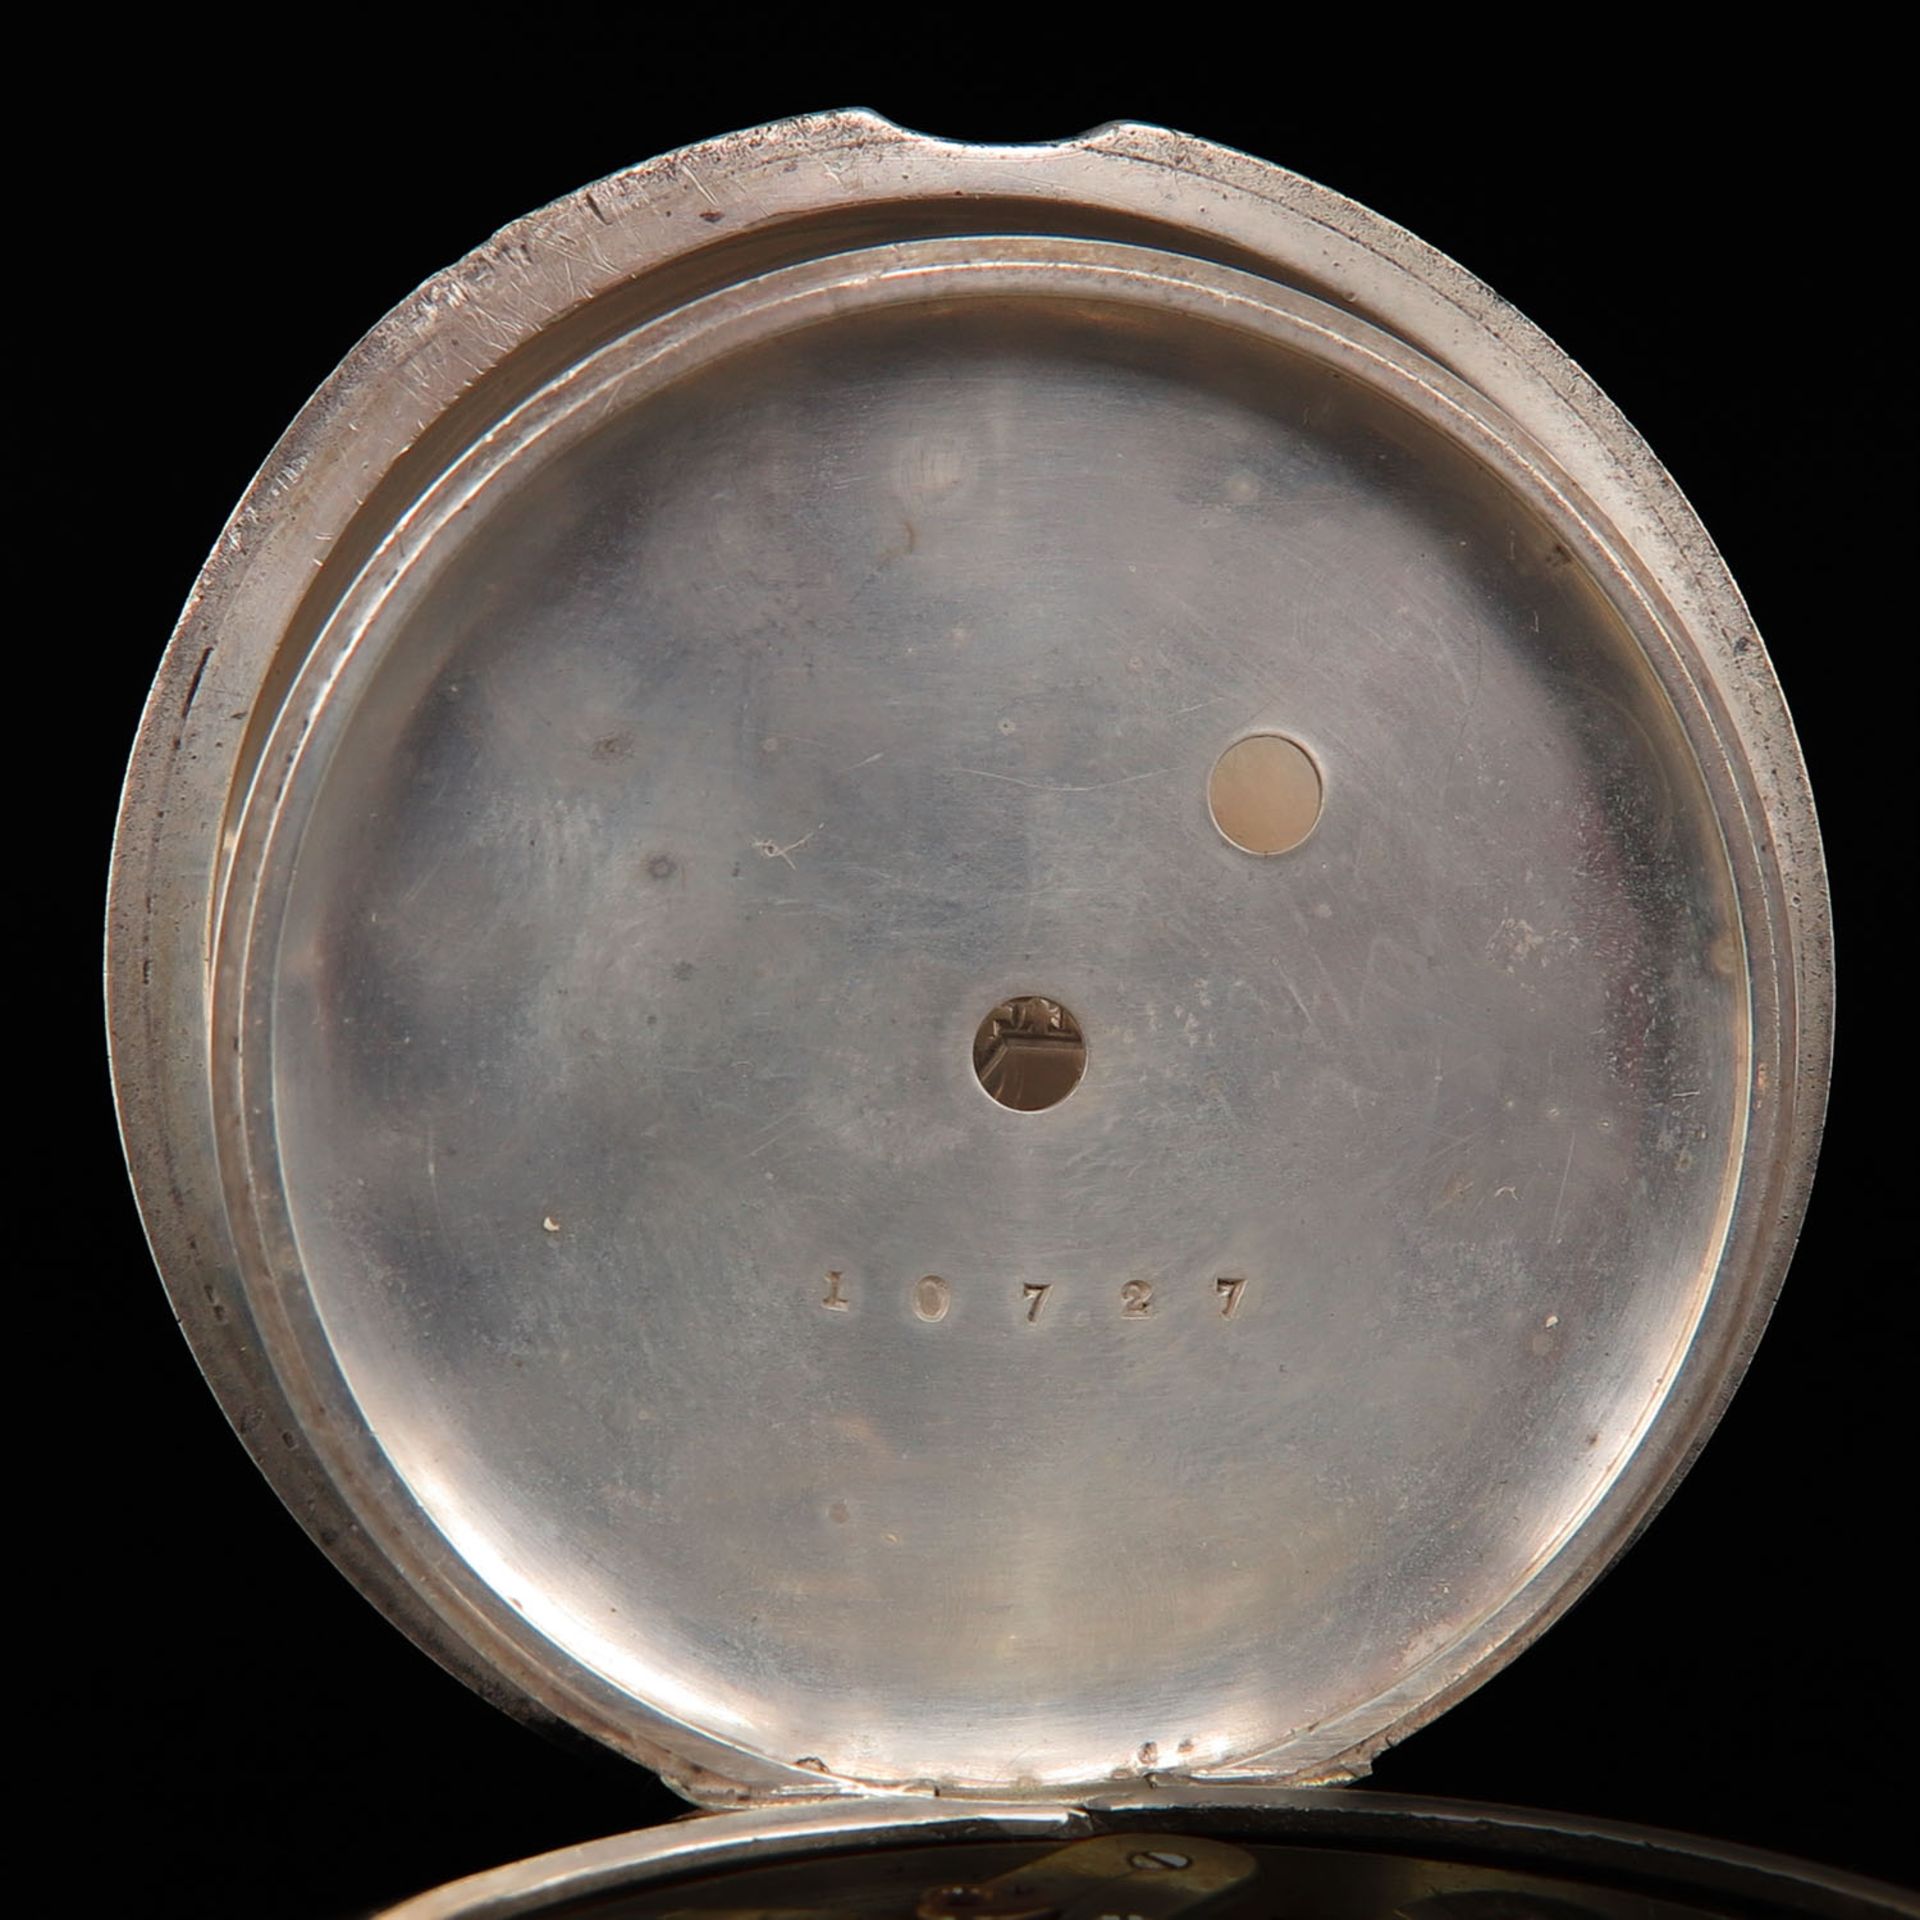 A James Nardin Locle Pocket Watch - Image 6 of 7